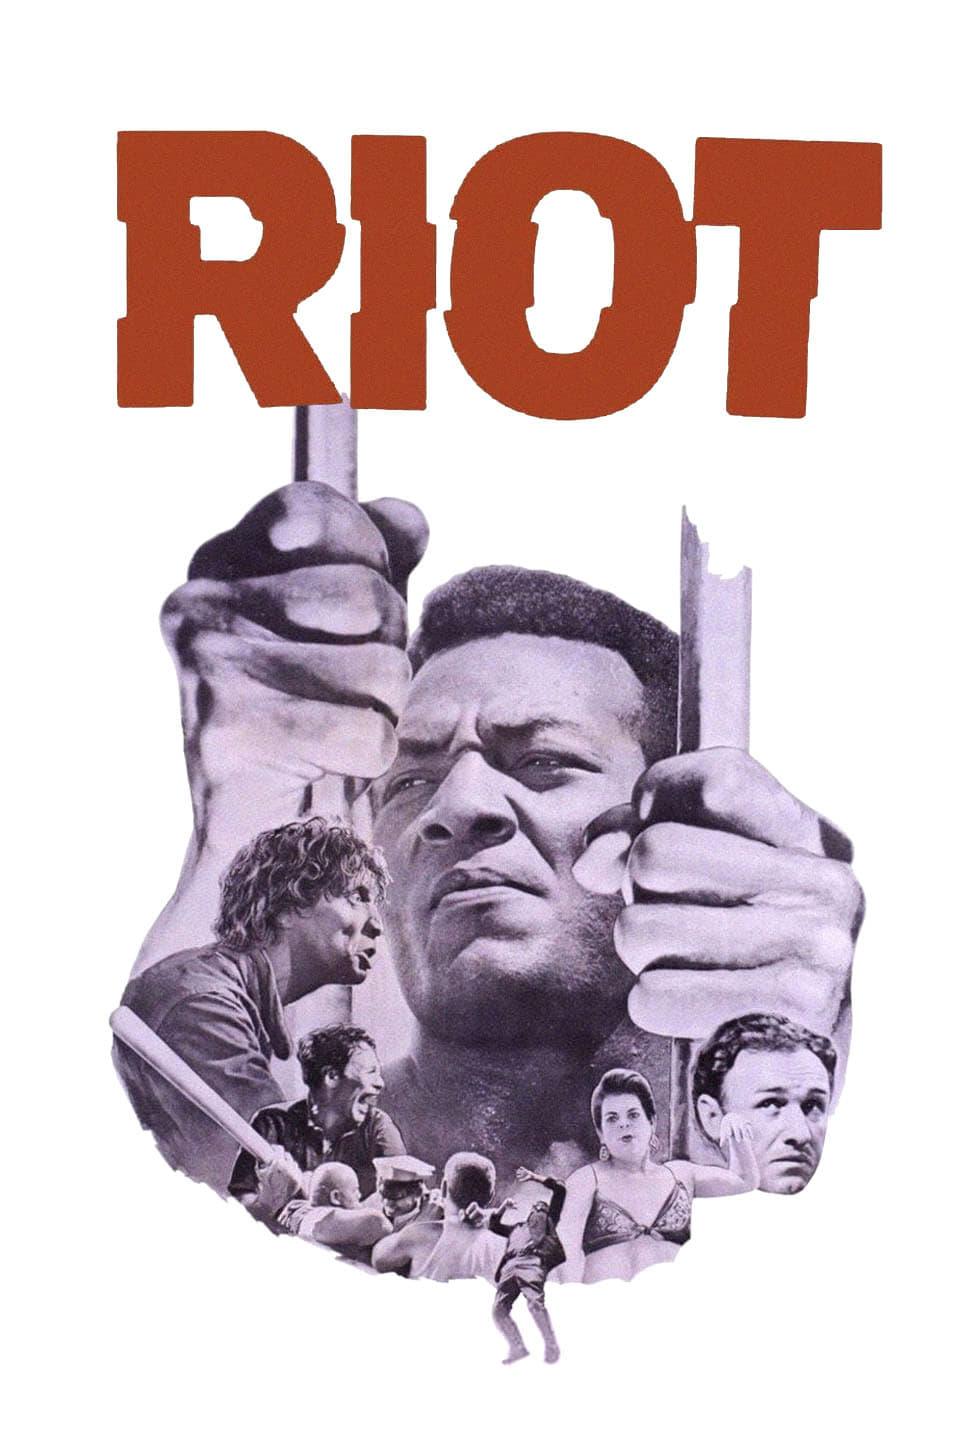 Riot poster